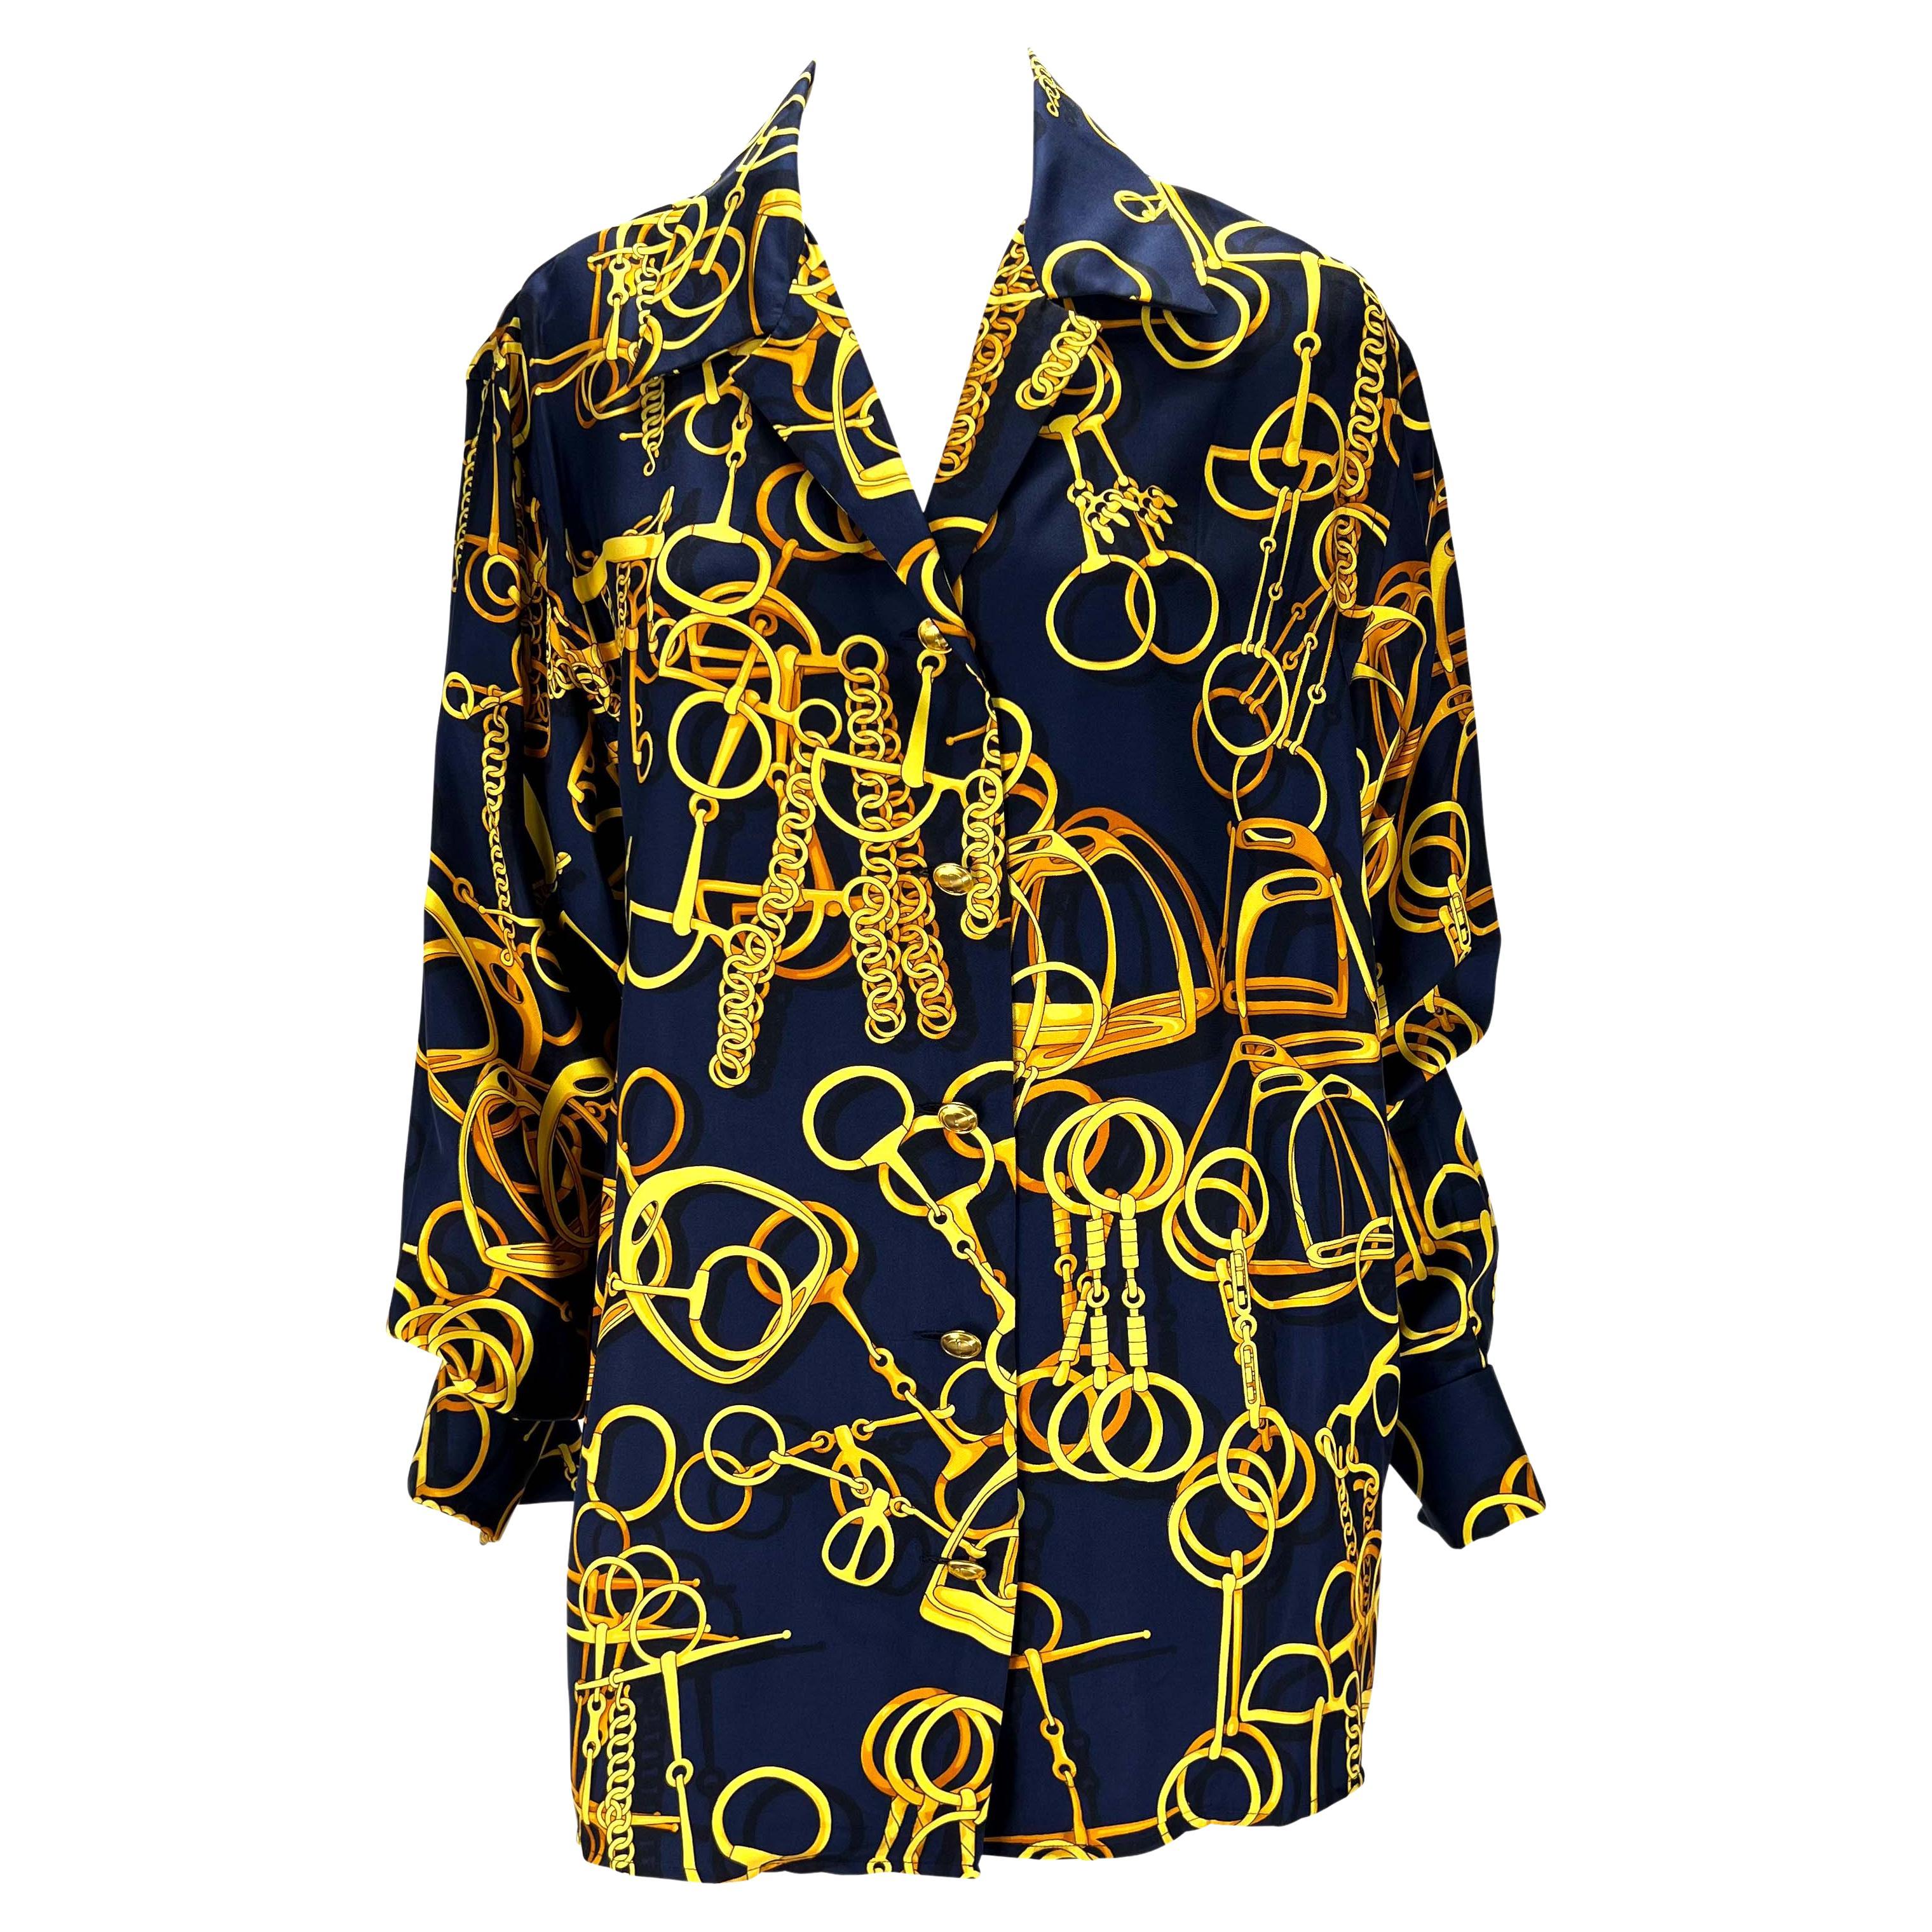 S/S 1993 Gucci Navy Gold Horsebit Print Silk French Cuff Blouse Linen Pants In Good Condition For Sale In West Hollywood, CA